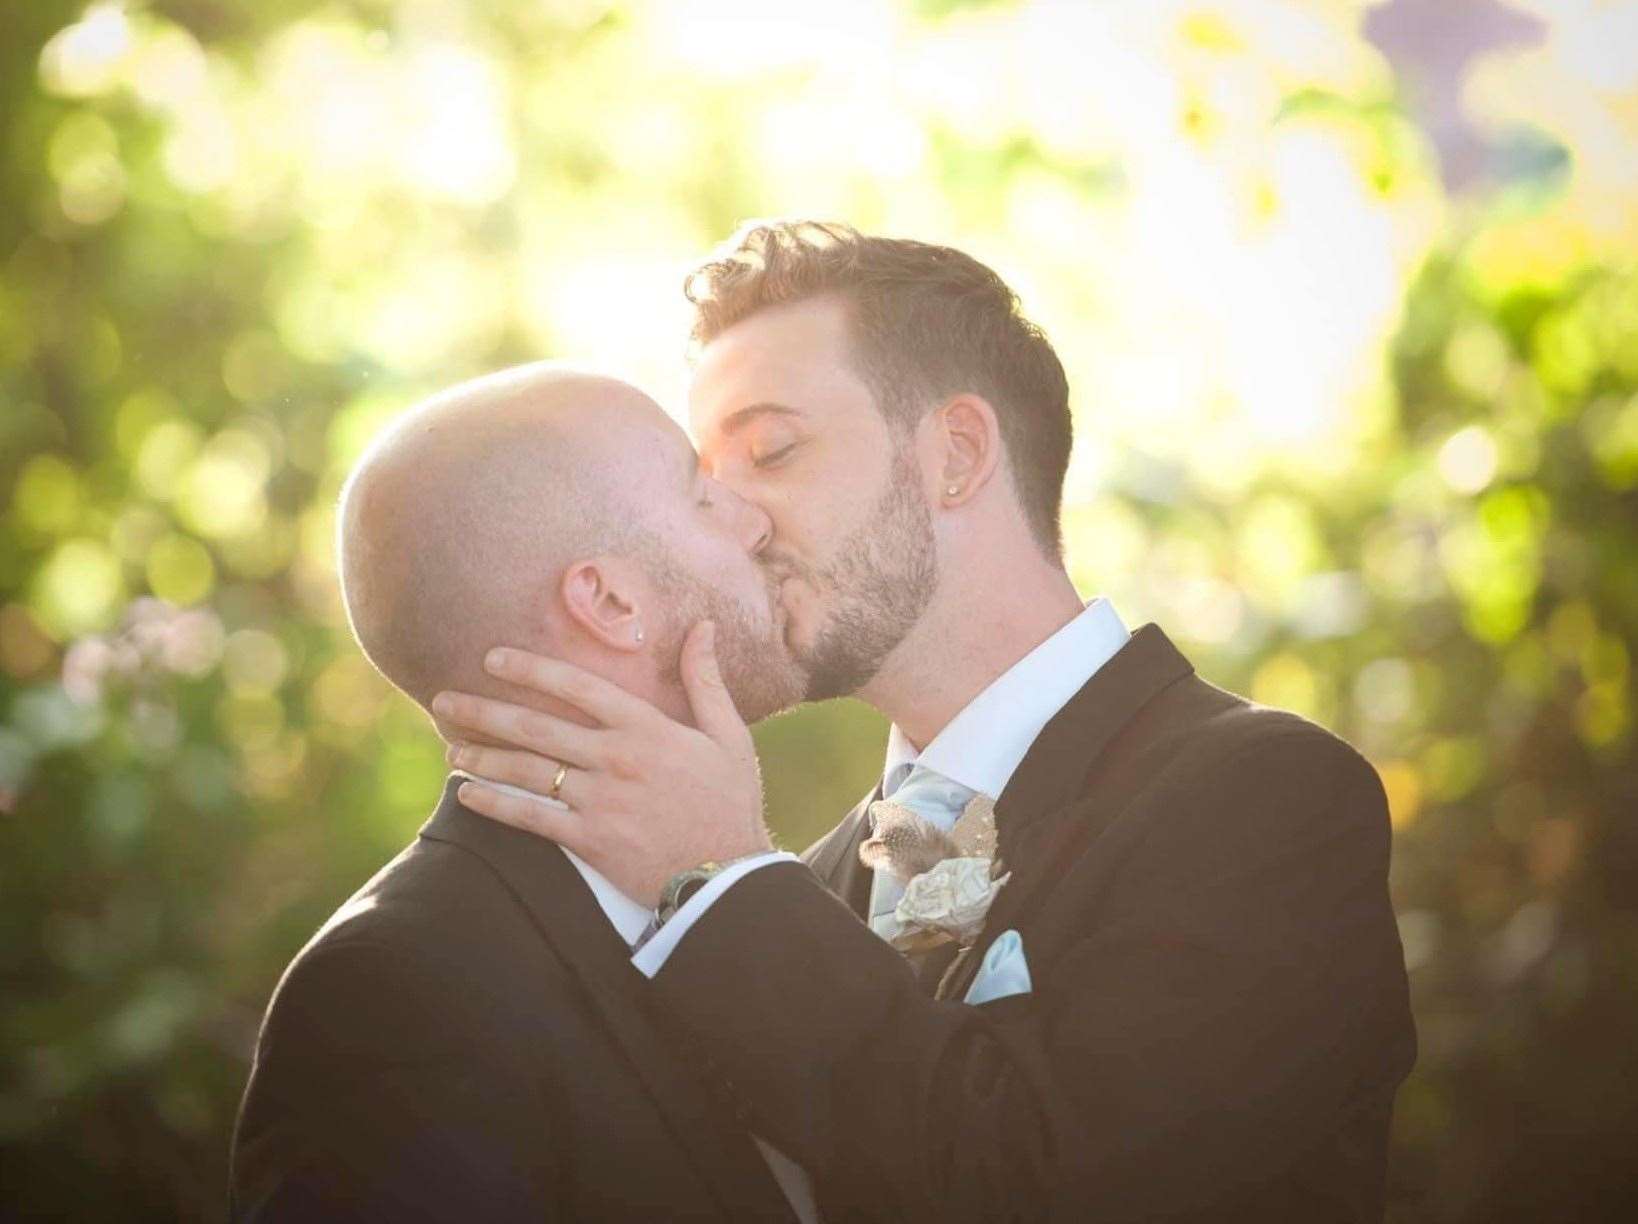 Luca and his husband Matt on their wedding day